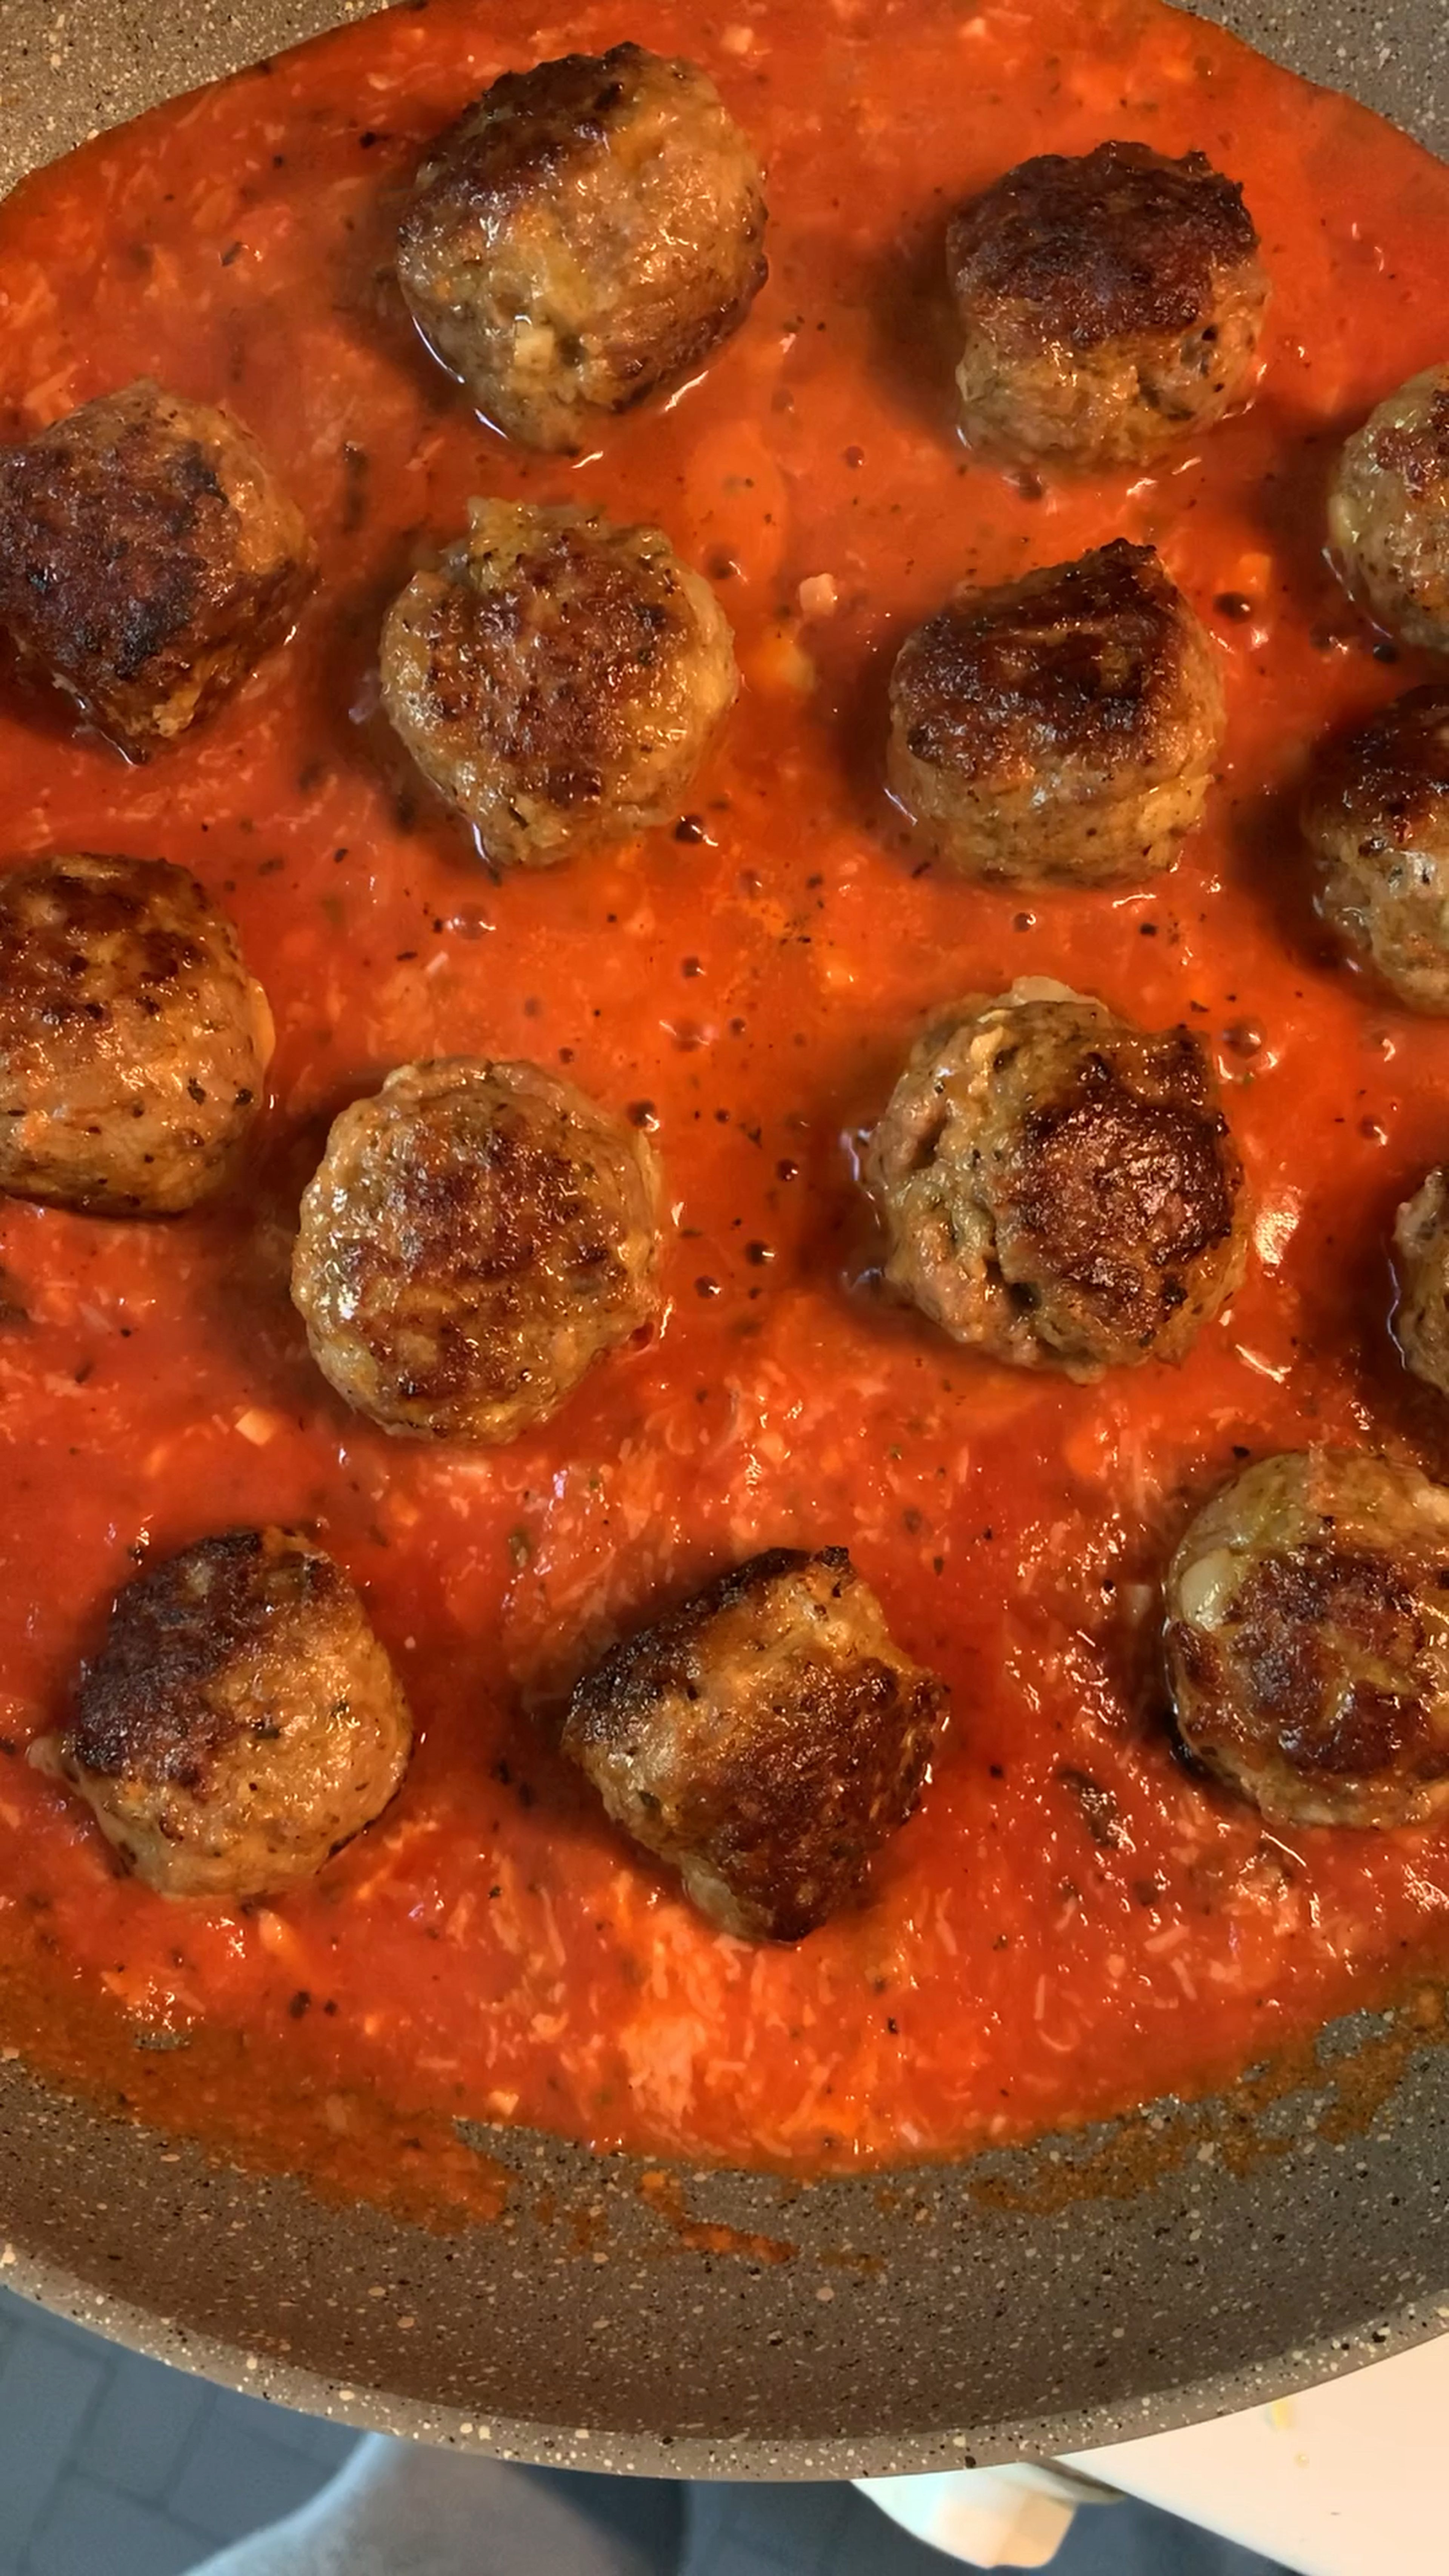 Add meatballs to the tomato sauce and stir. Let the sauce cover all the meatballs.